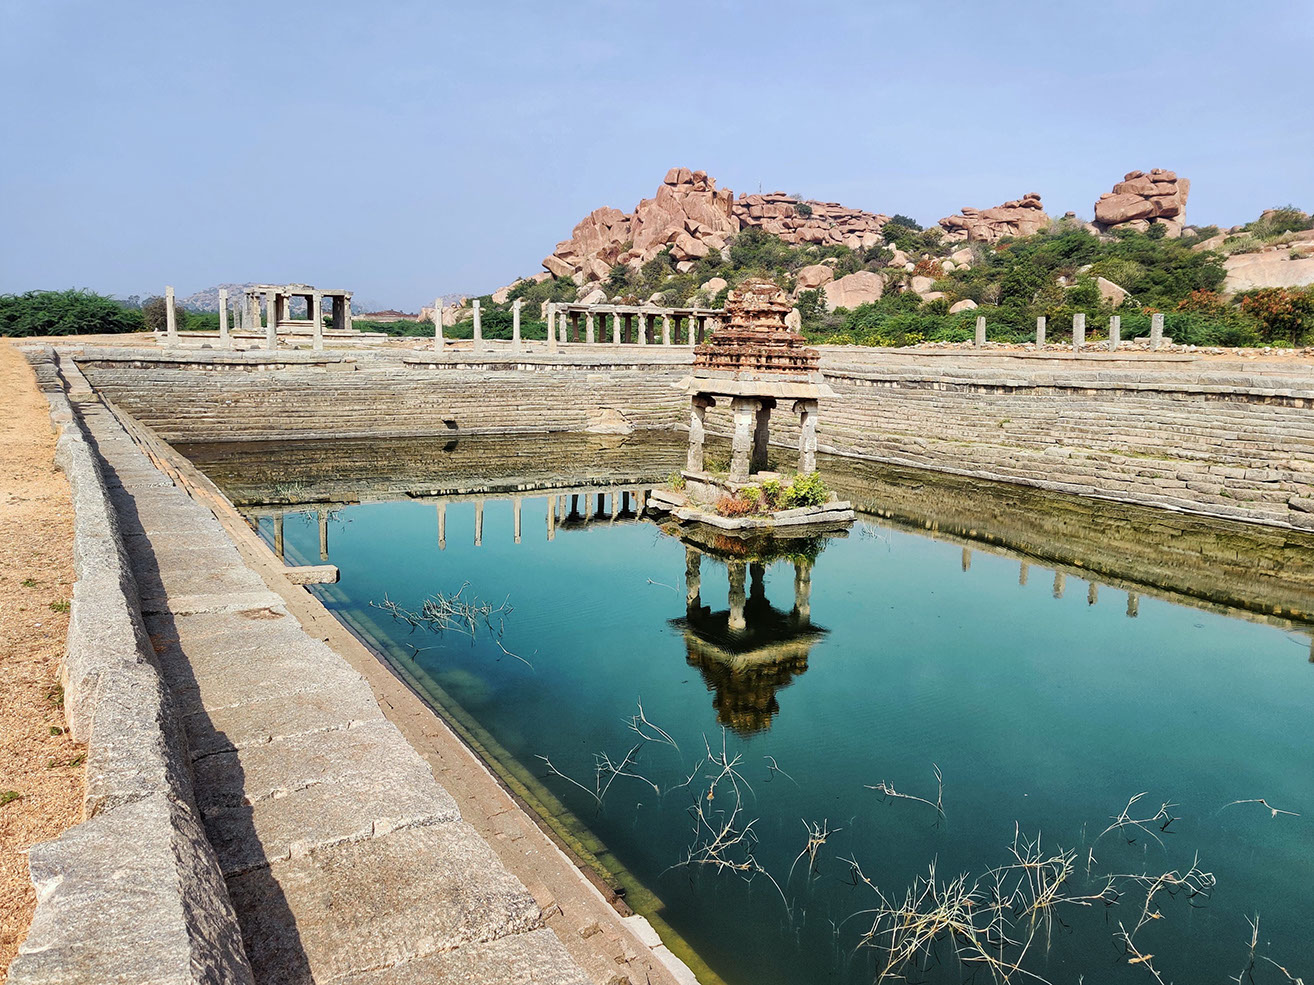 Sacred tank of ancient era exhibits exceptional design and architecture of Hampi